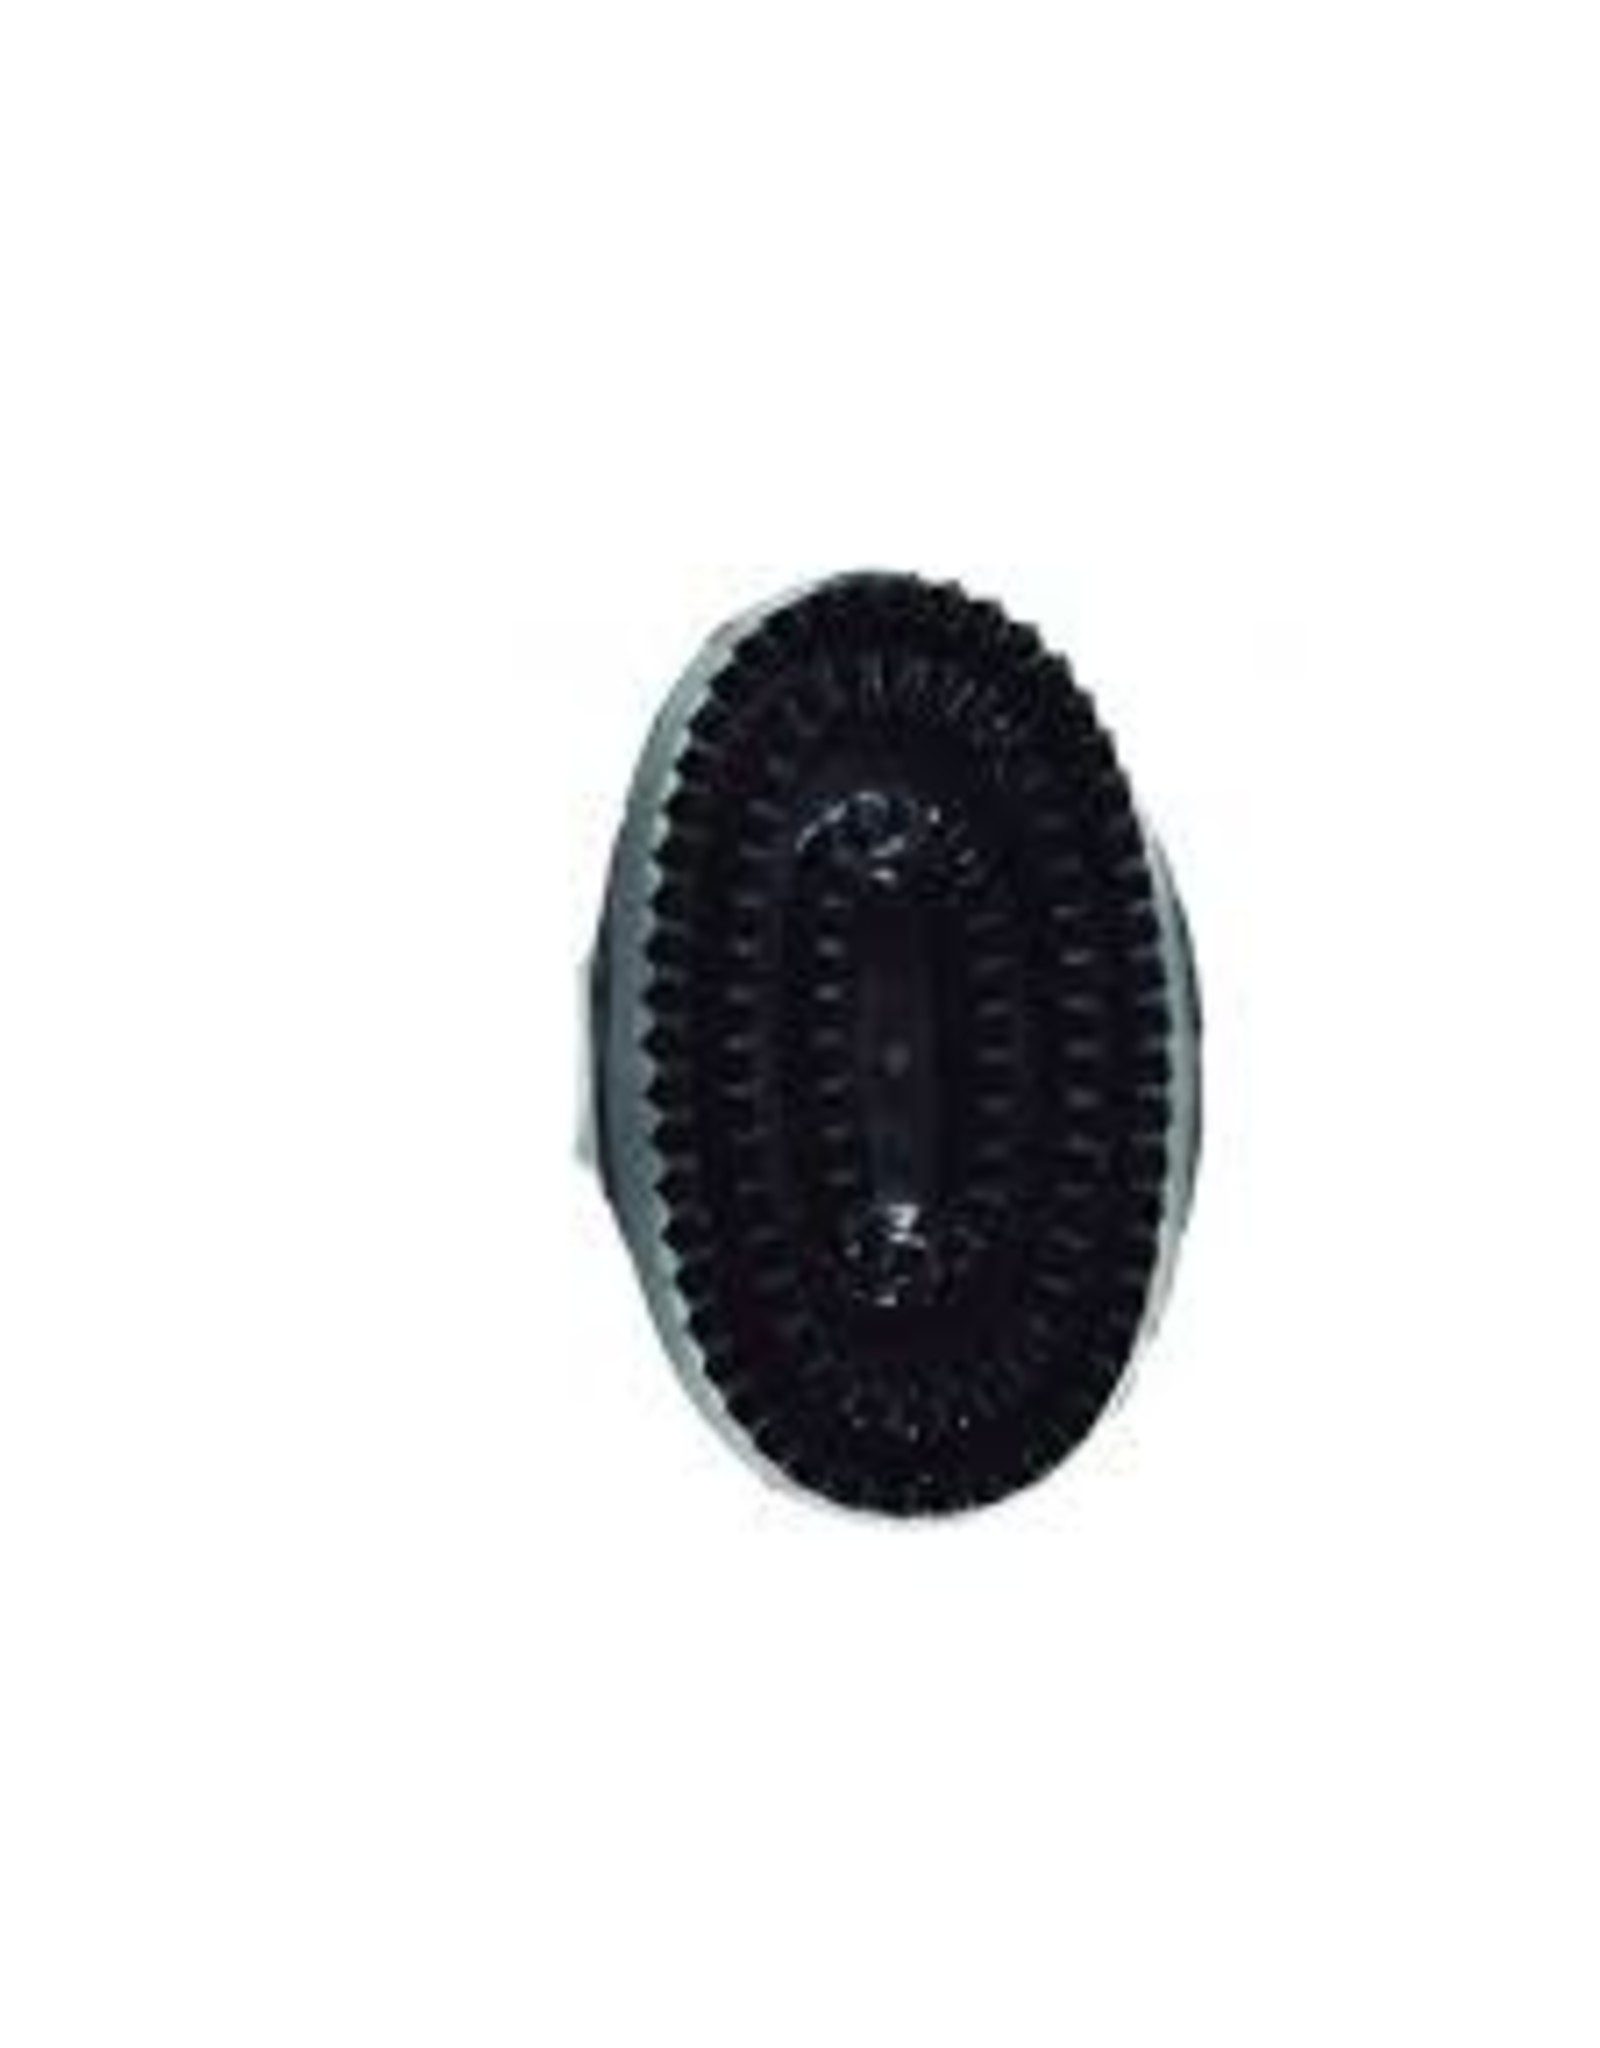 Small Rubber Curry Comb, JR size